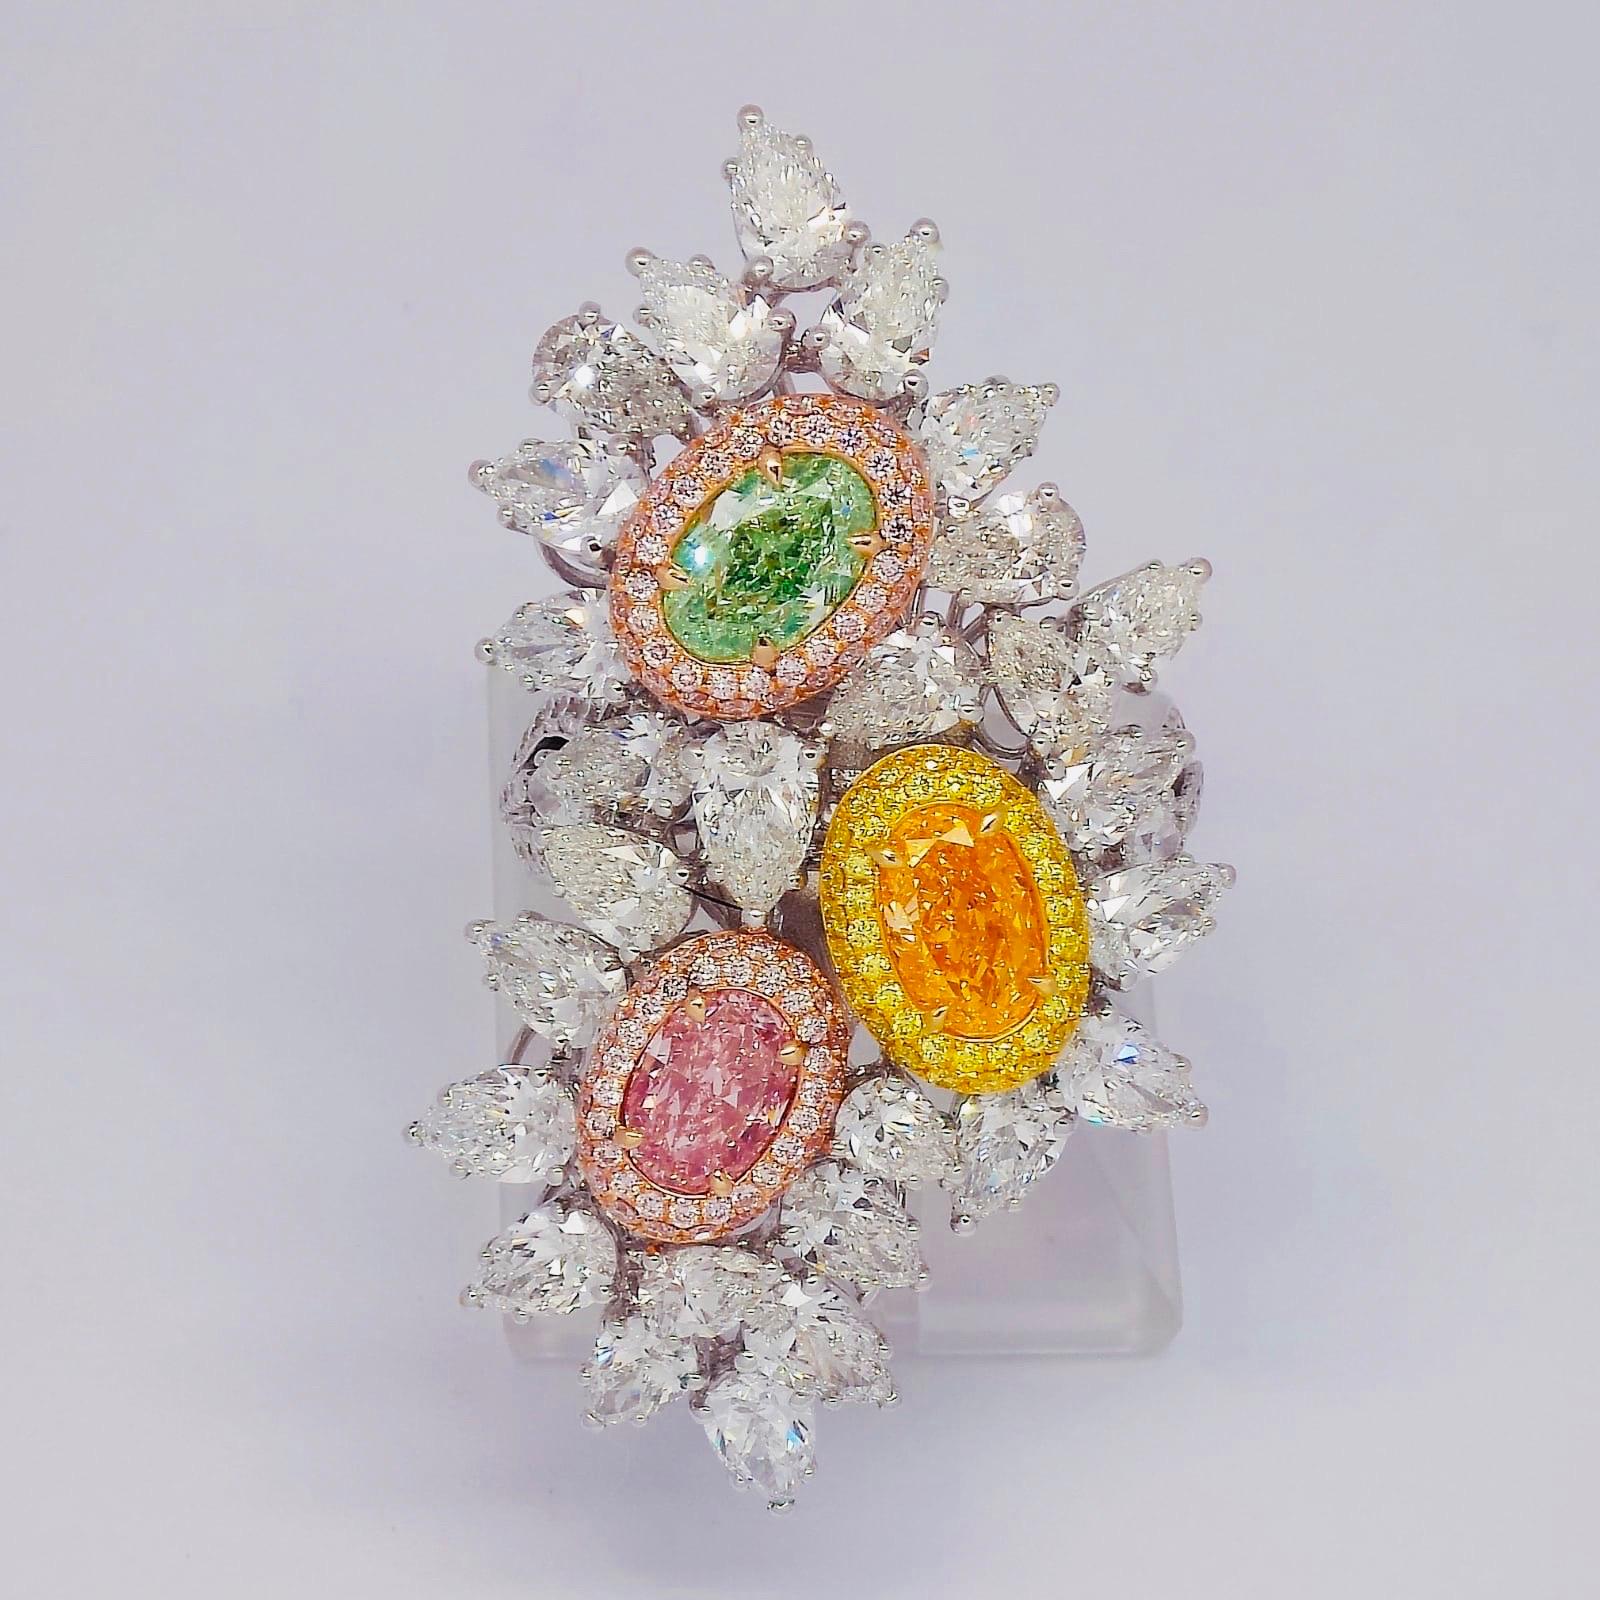 From the Emilio Jewelry Museum Vault, Showcasing a 3 magnificent investment grade diamonds. Set with center stones all Gia certified 
1.00 carat natural green diamond
1.00 carat natural pink diamond 
1.00 carat natural orange diamond 
Please inquire